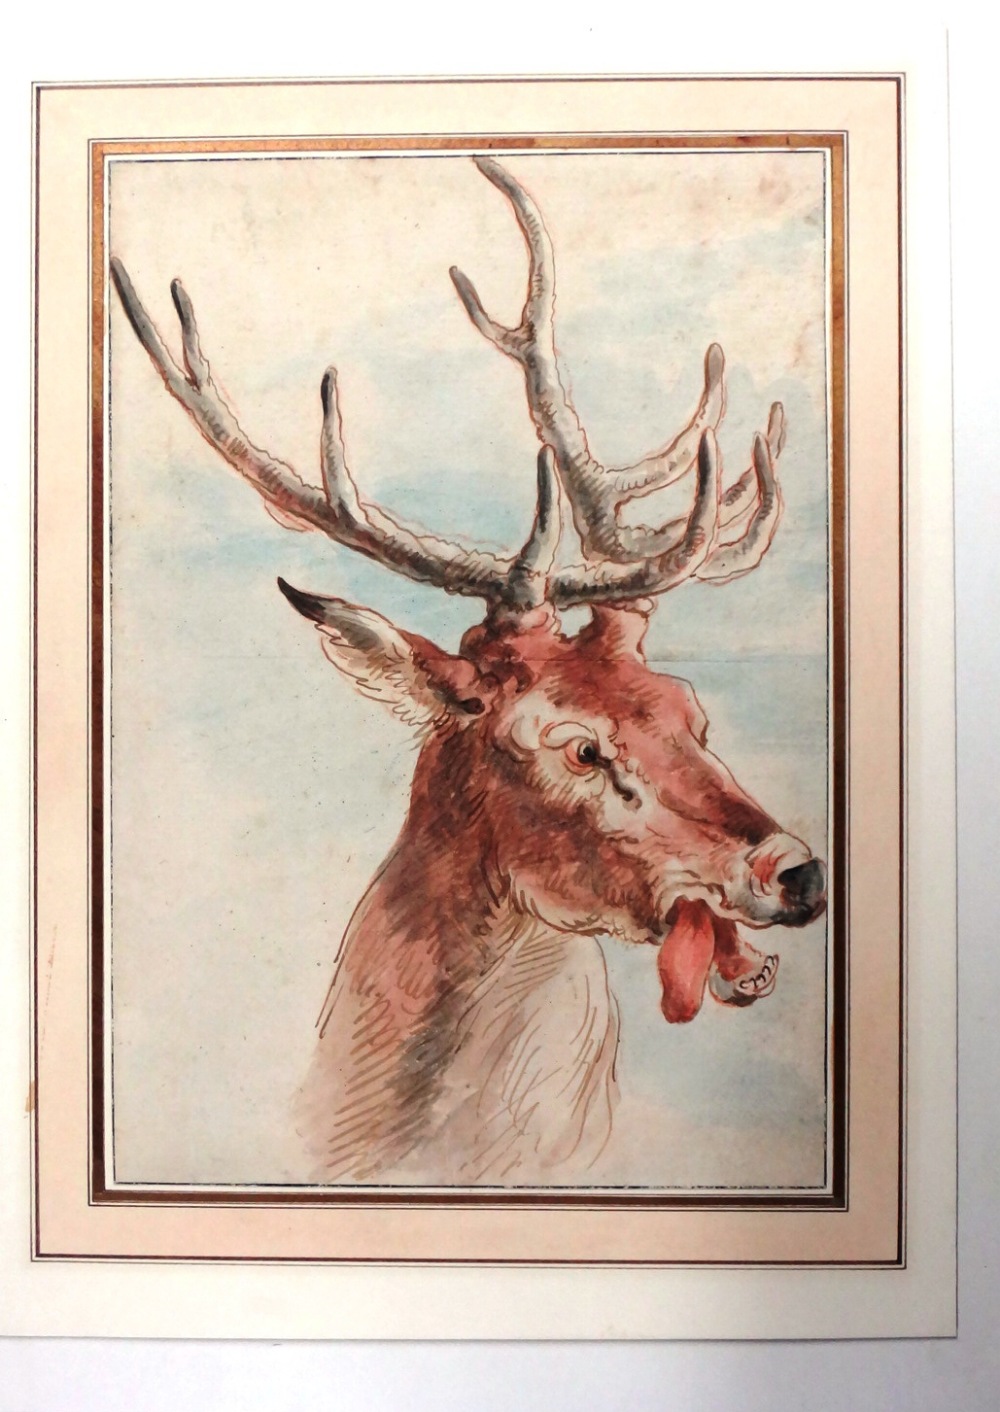 Continental School (19th century), Head study of a stag, pen, ink and watercolour, unframed, 29.